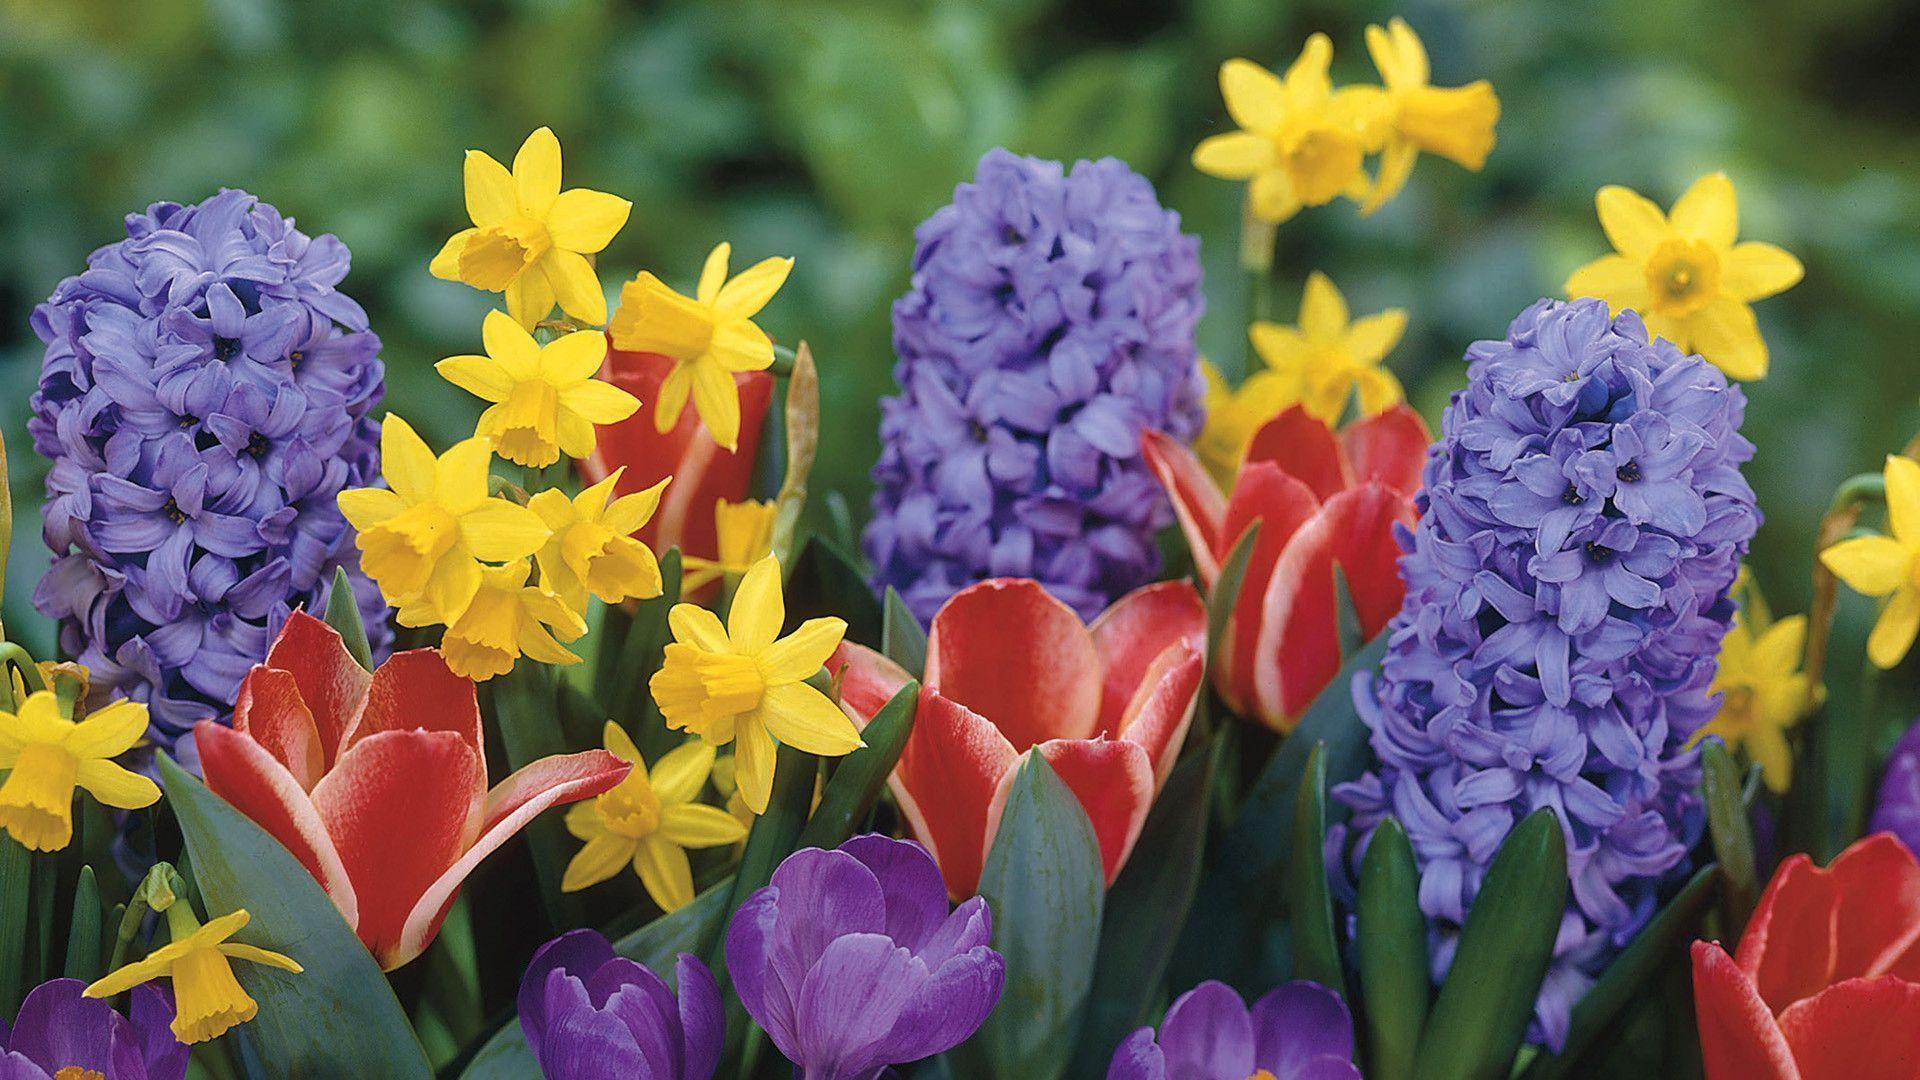 daffodils and hyacinth wallpaper Search Engine